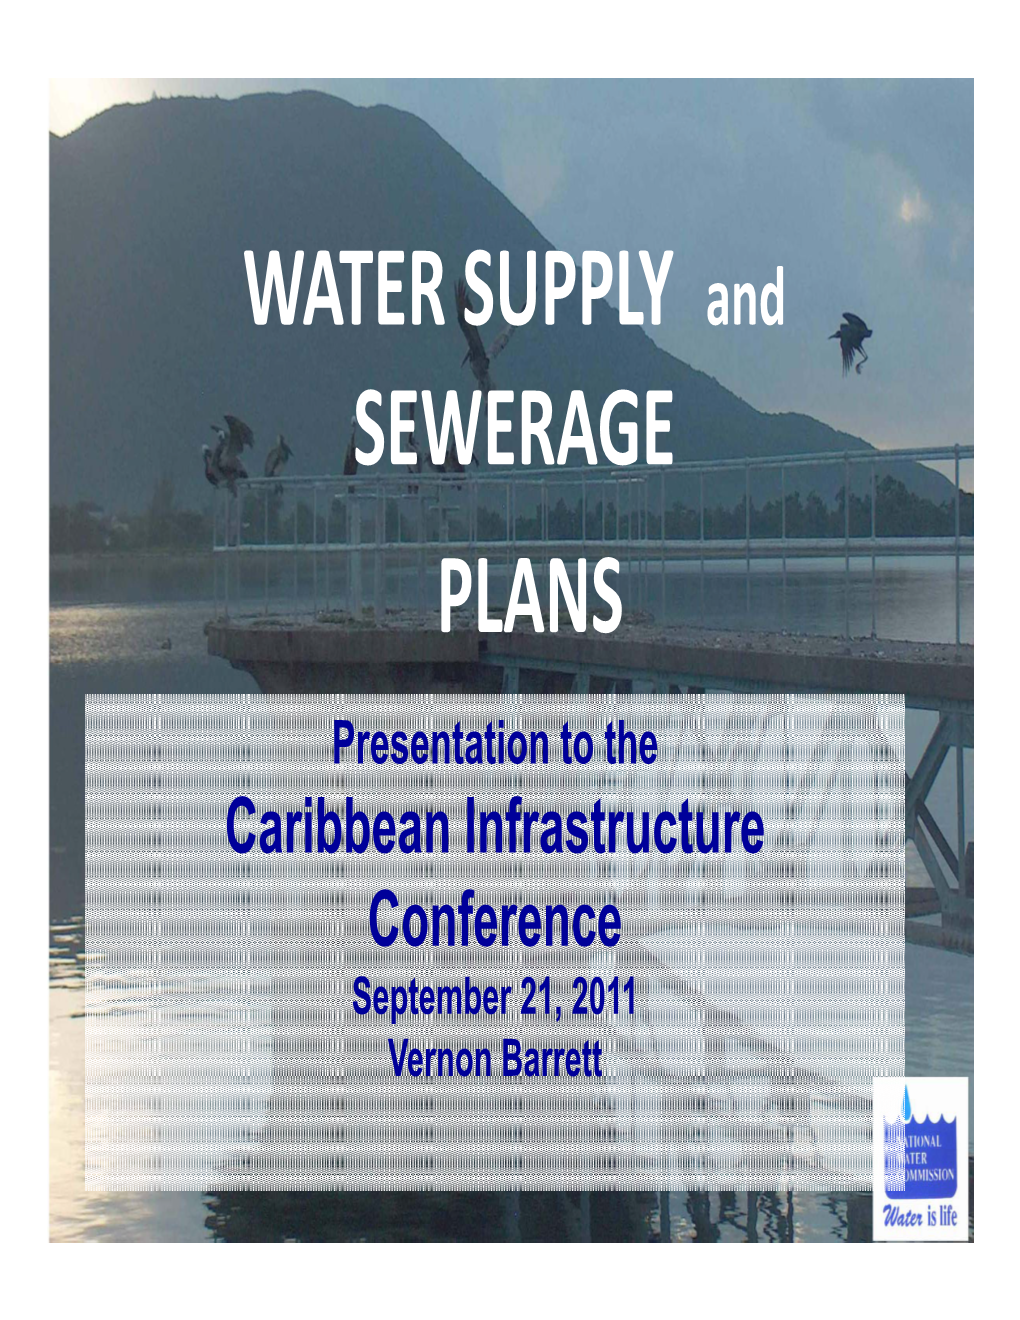 WATER SUPPLY and SEWERAGE PLANS